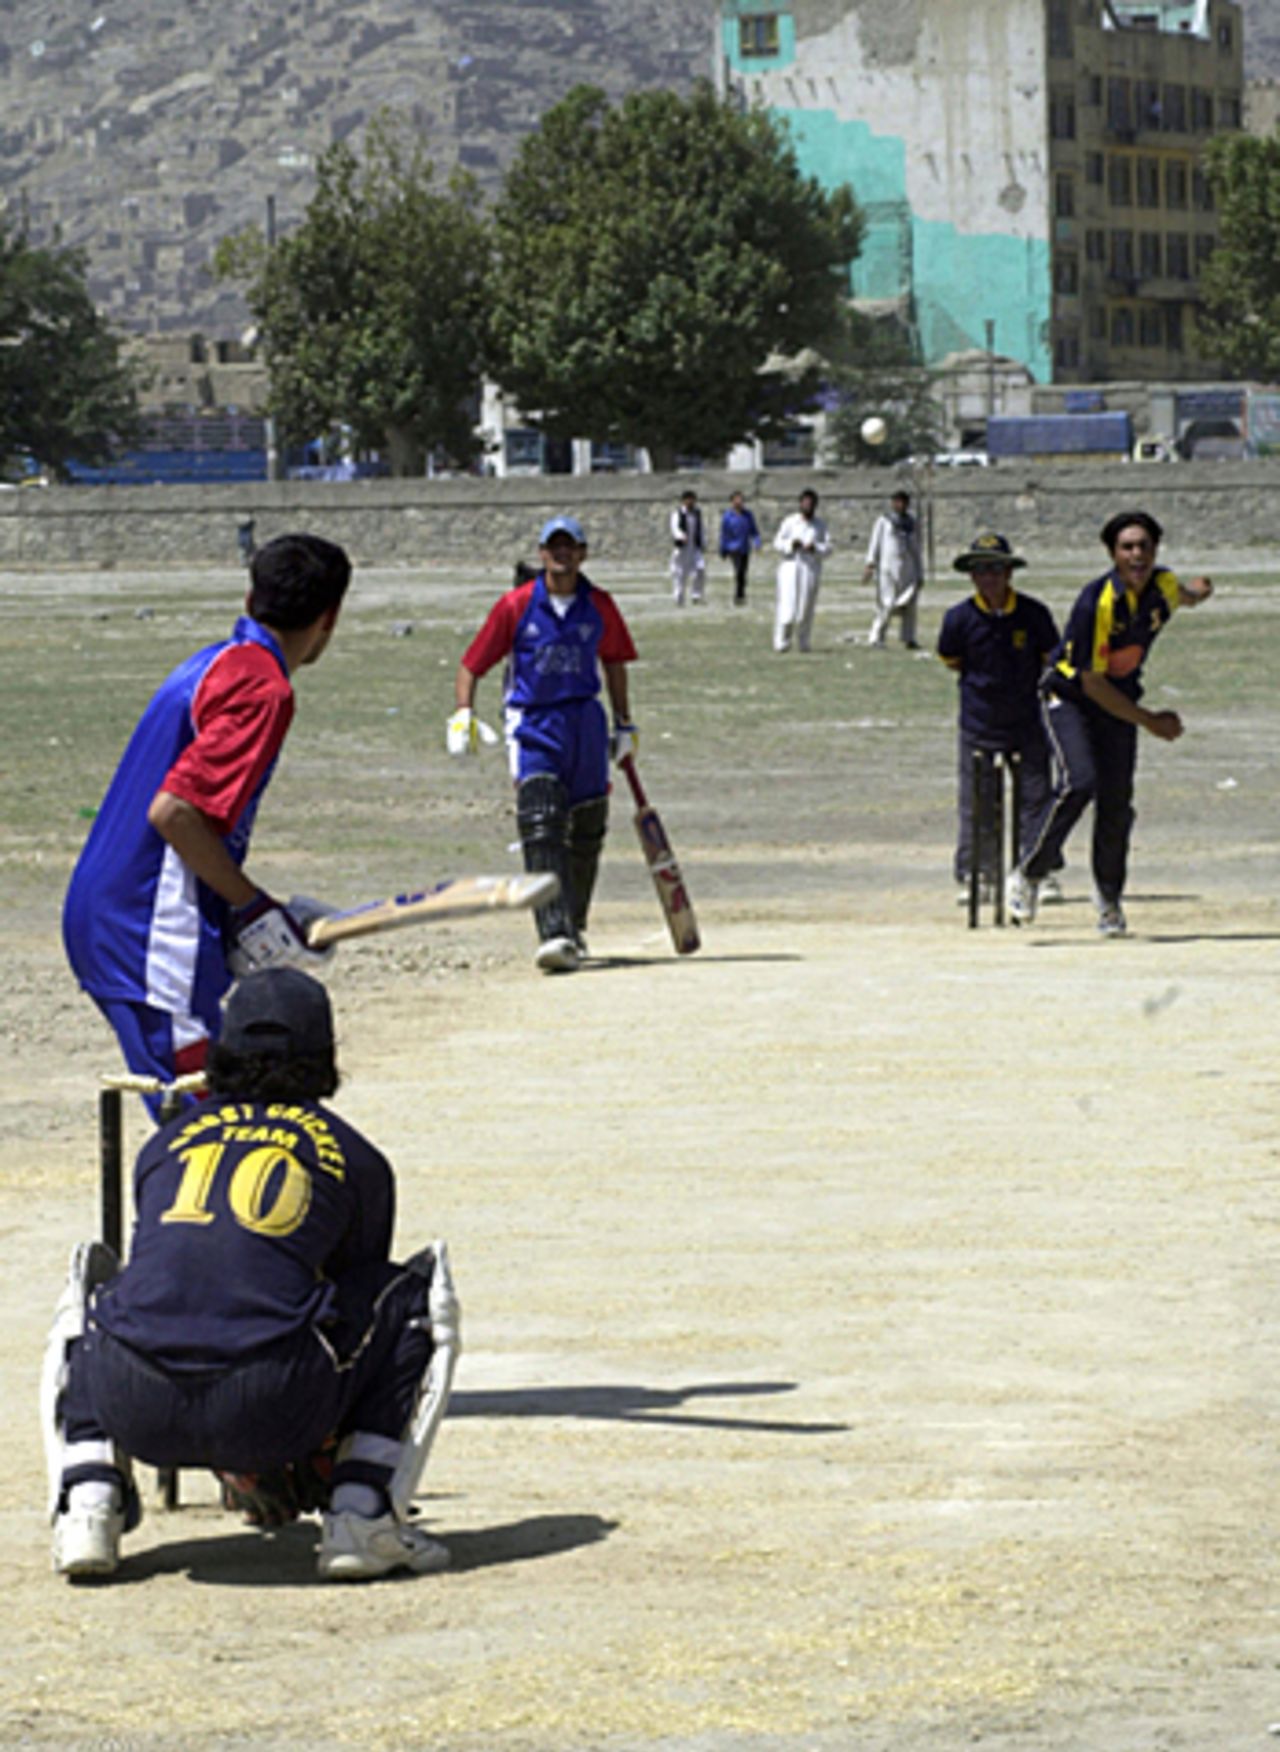 Afghan cricketers take part in a match on a ground in front of Kabul's Stadium, Afghanistan, August 9, 2005